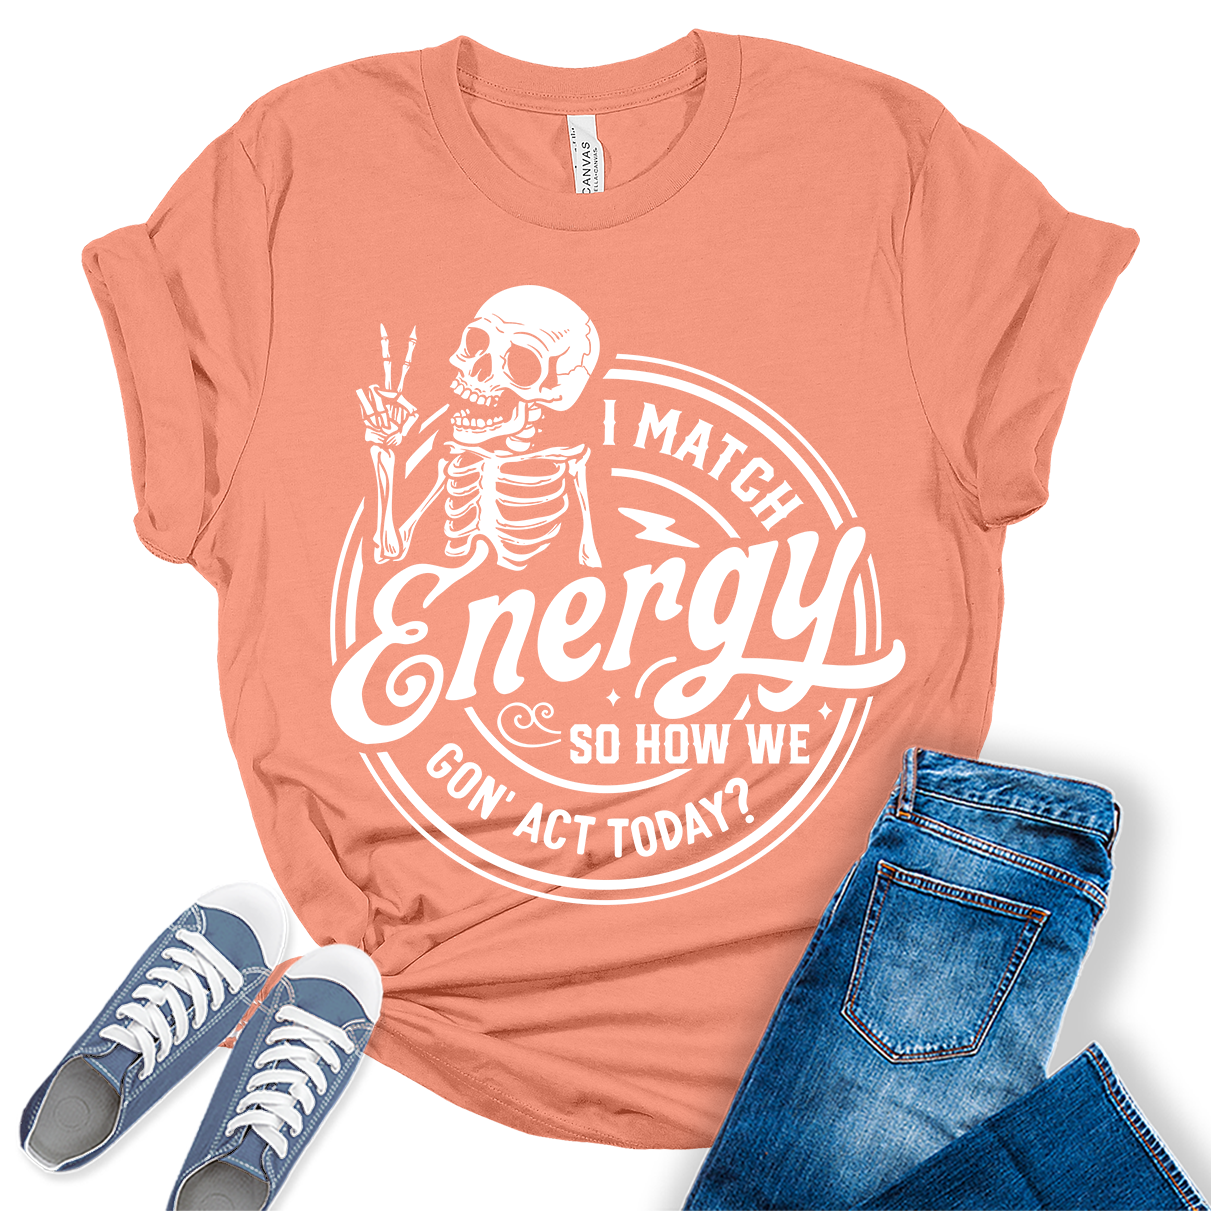 I Match Energy Shirt Trendy Funny Teen Sarcastic Graphic Tees for Women